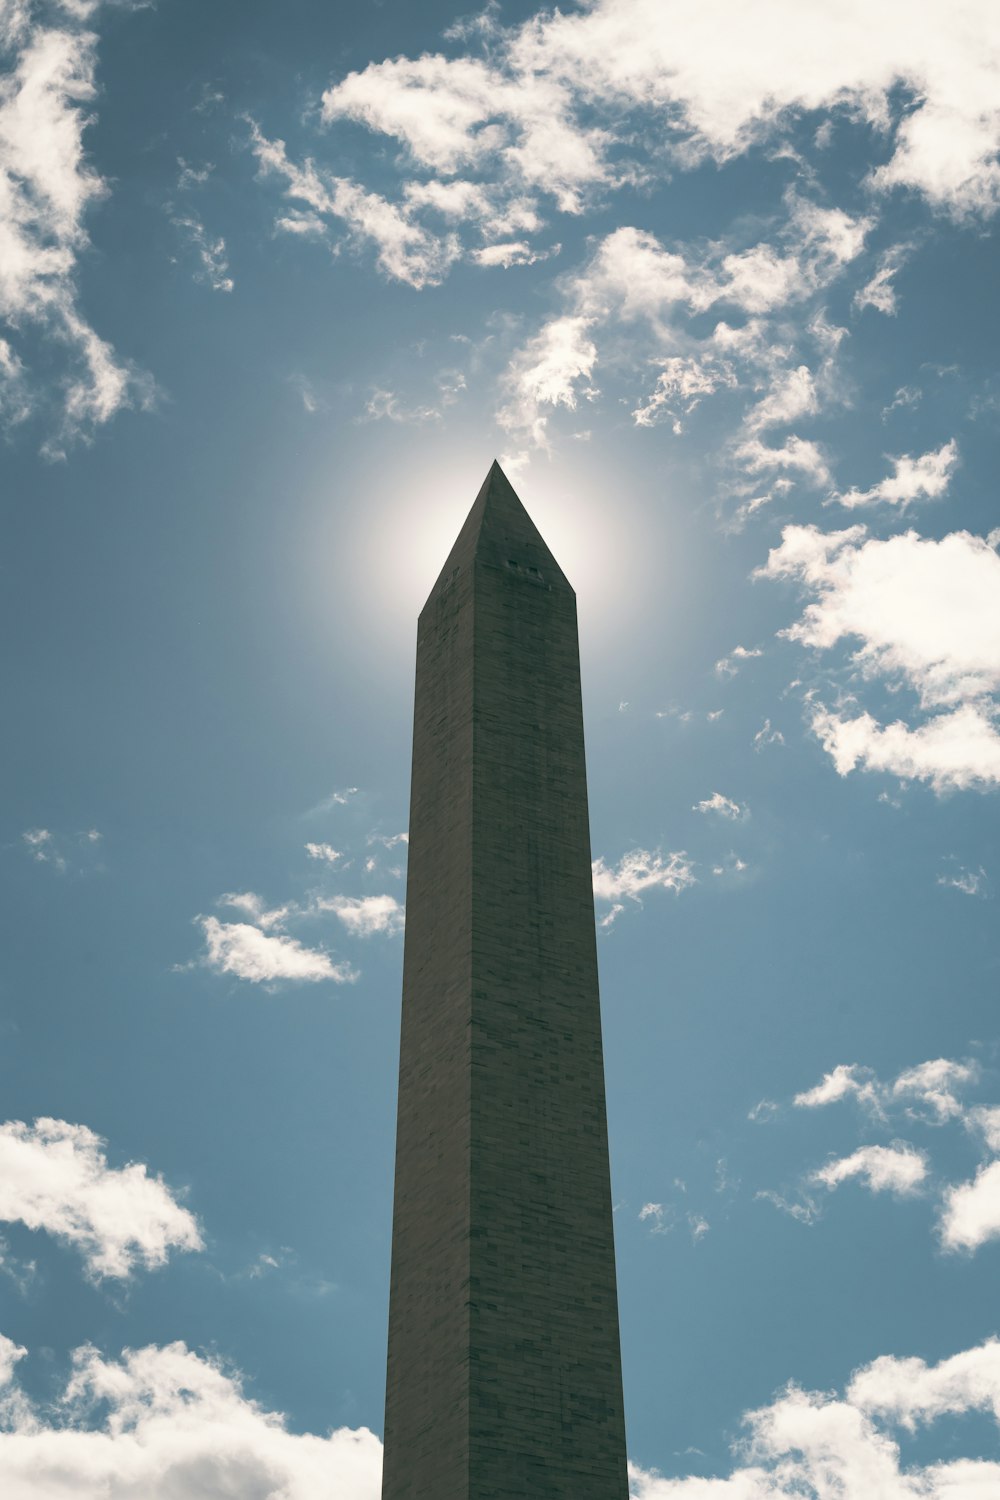 the washington monument is silhouetted against a partly cloudy sky